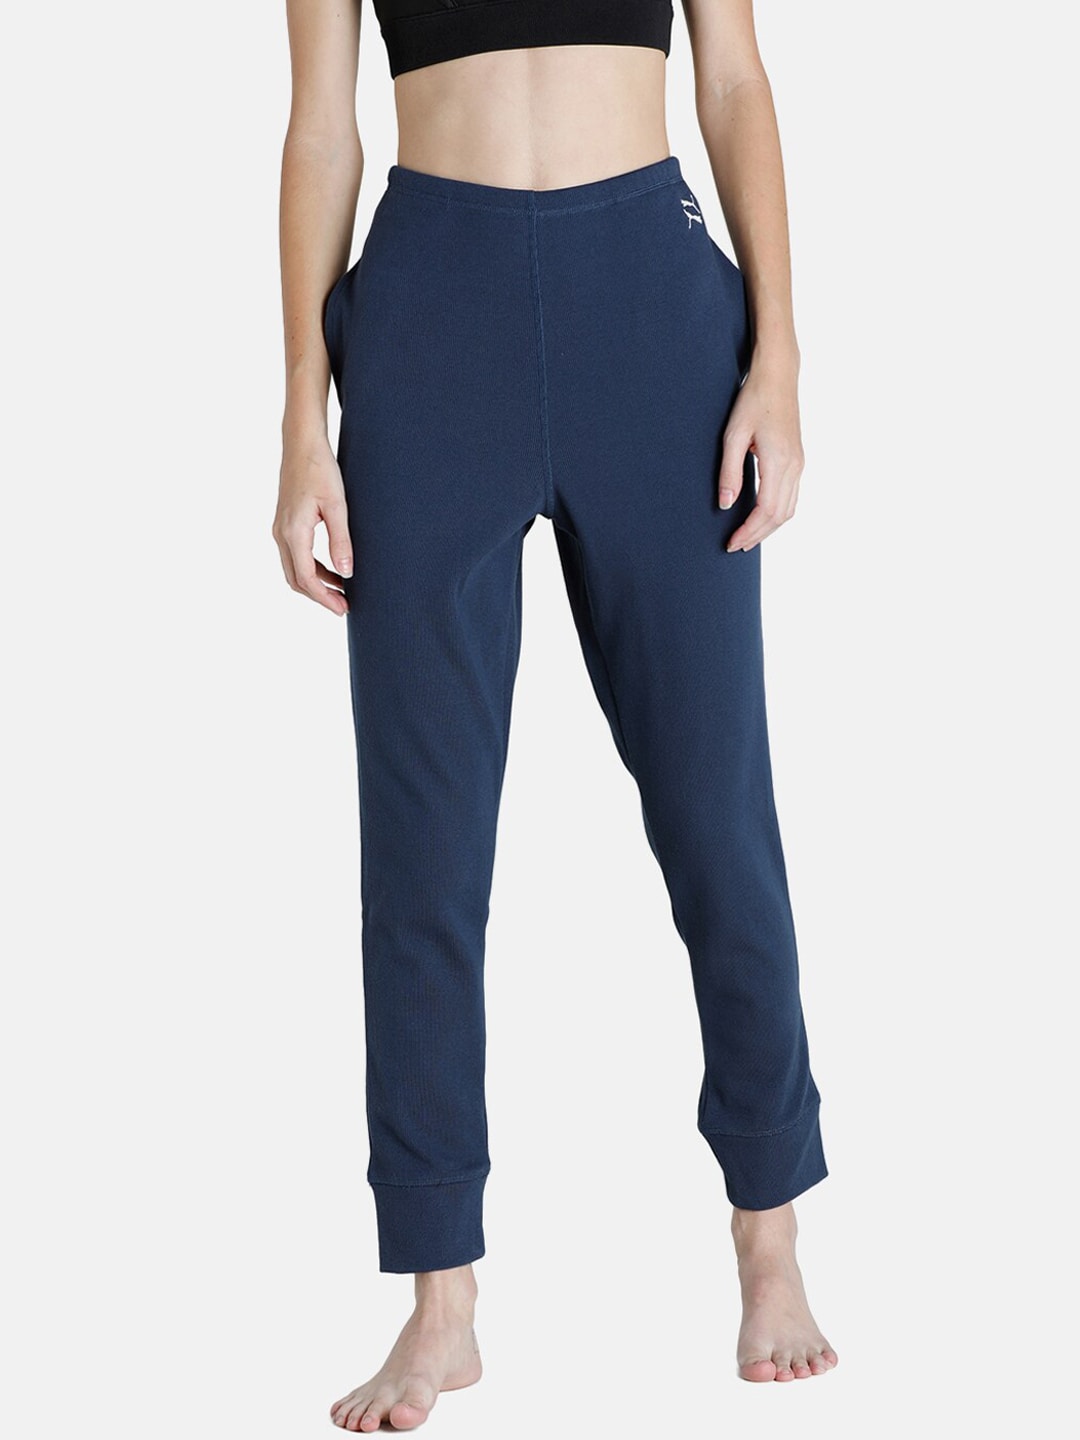 Puma Women Blue Solid Yoga Track Pants Price in India